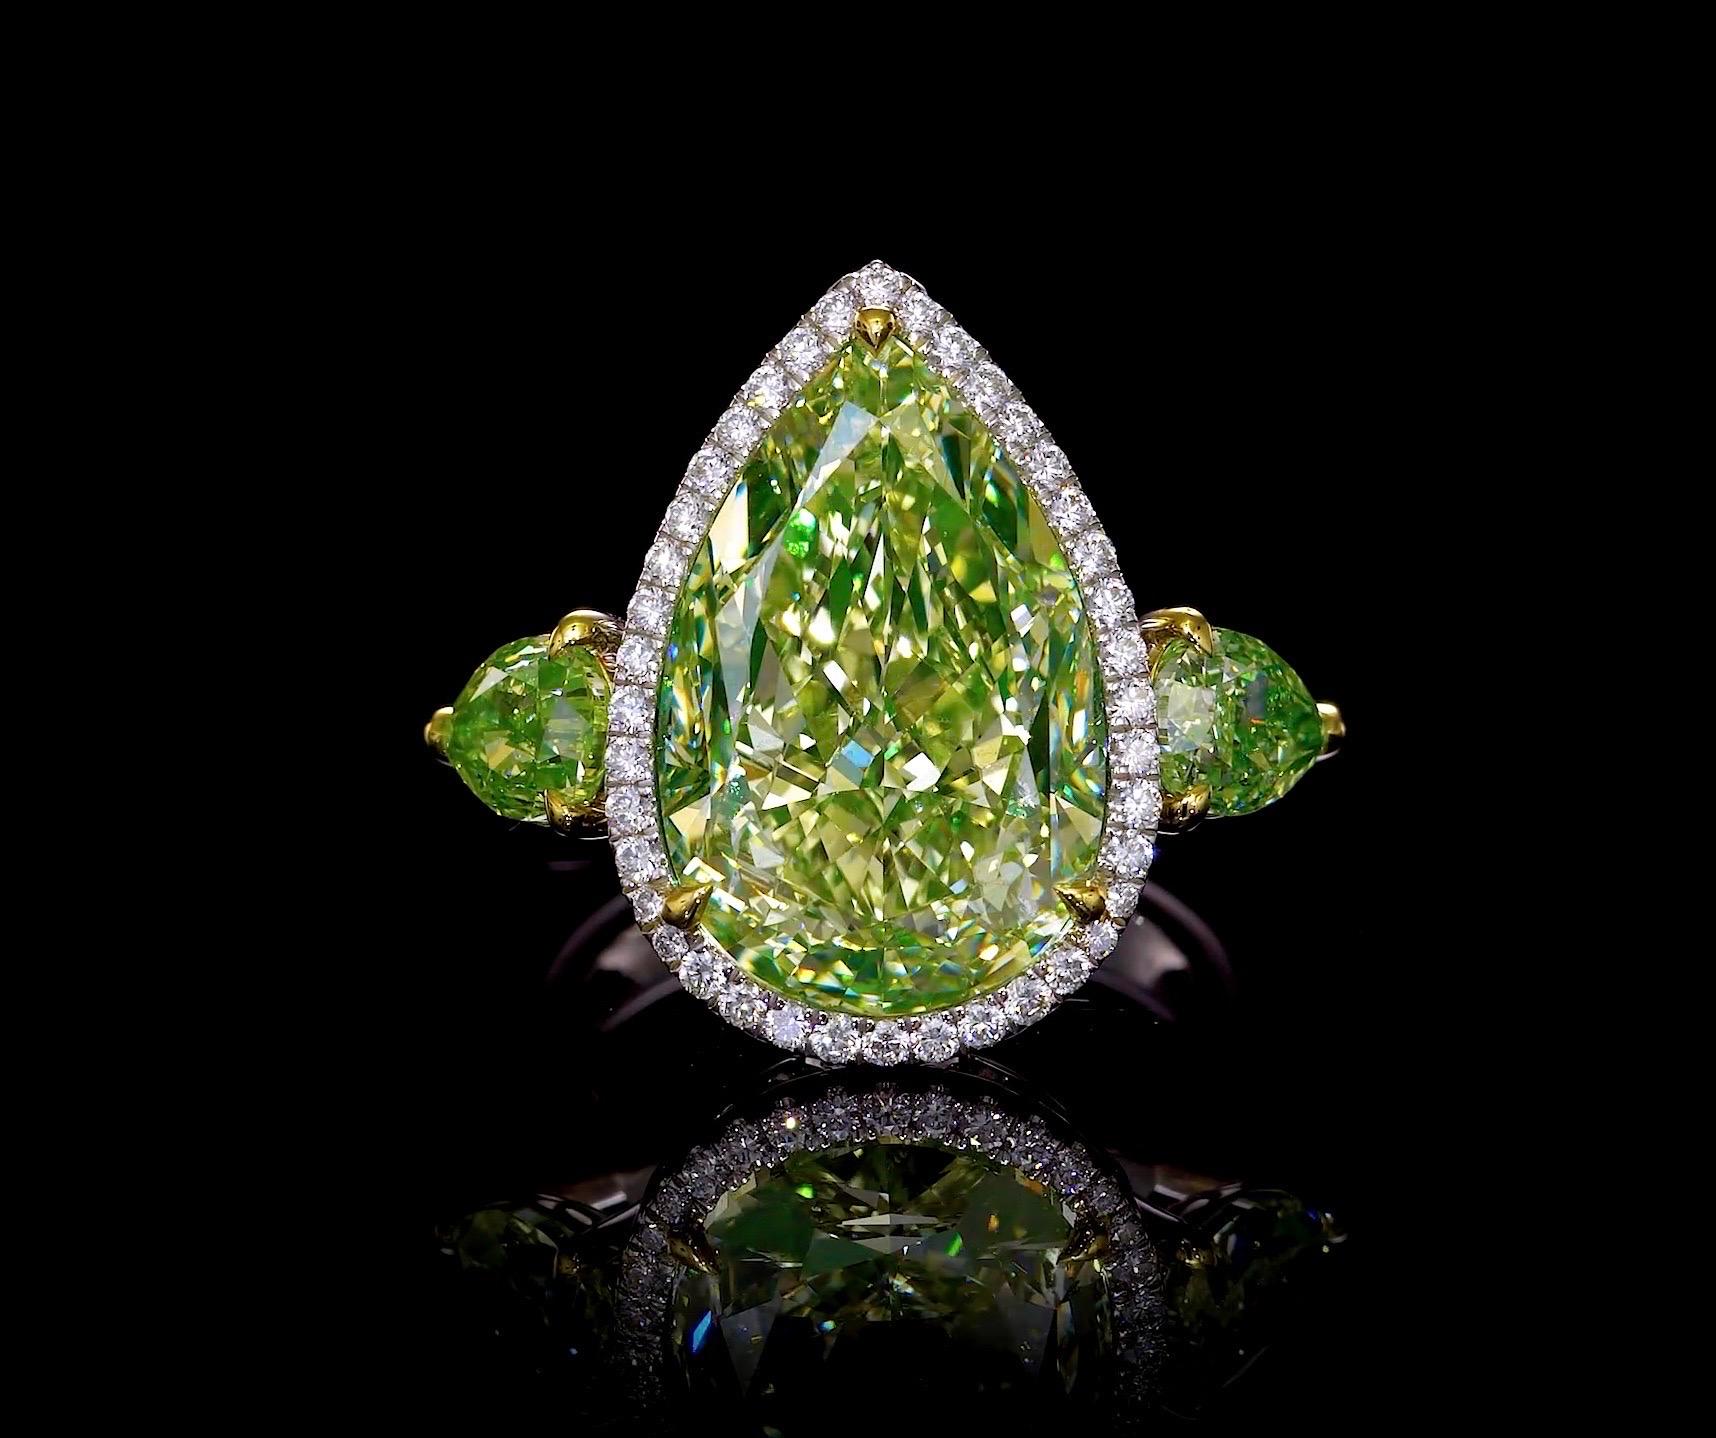 Another hand made masterpiece from the Museum Vault At Emilio Jewelry, located on New York's iconic Fifth Avenue.
Please inquire for additional details, certificates, pricing, or any other questions.
Emilio is an expert in natural fancy colored